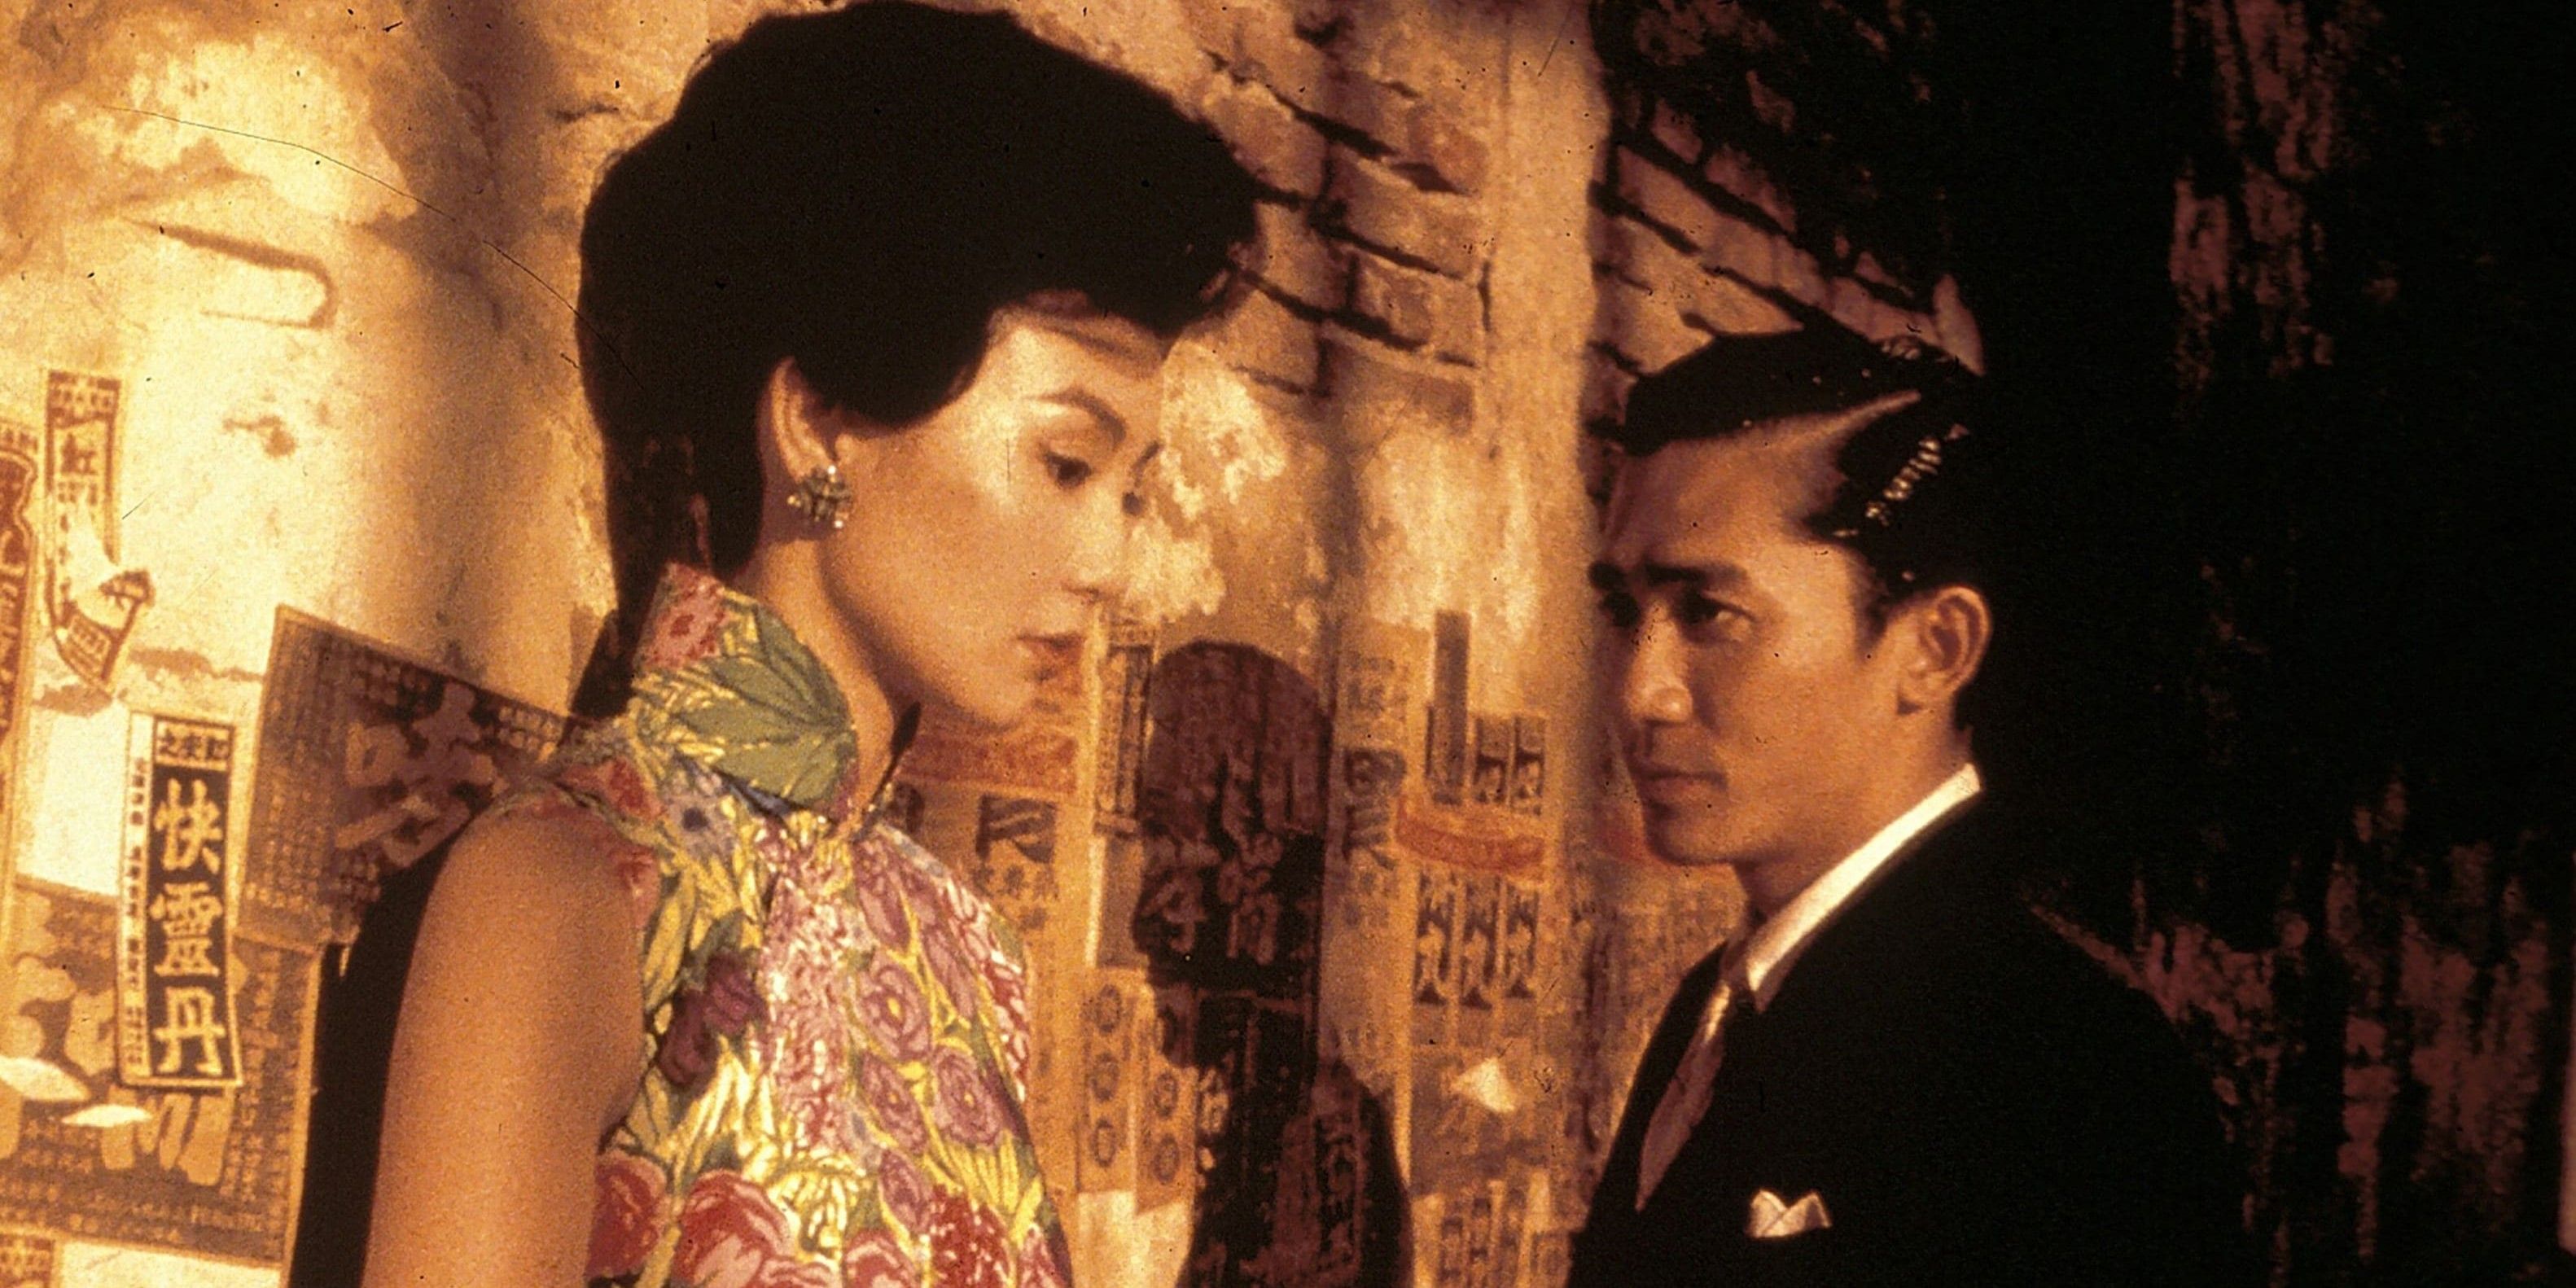 Tony Chiu-Wai Leung stares at Maggie Cheung in In The Mood For Love (2000).